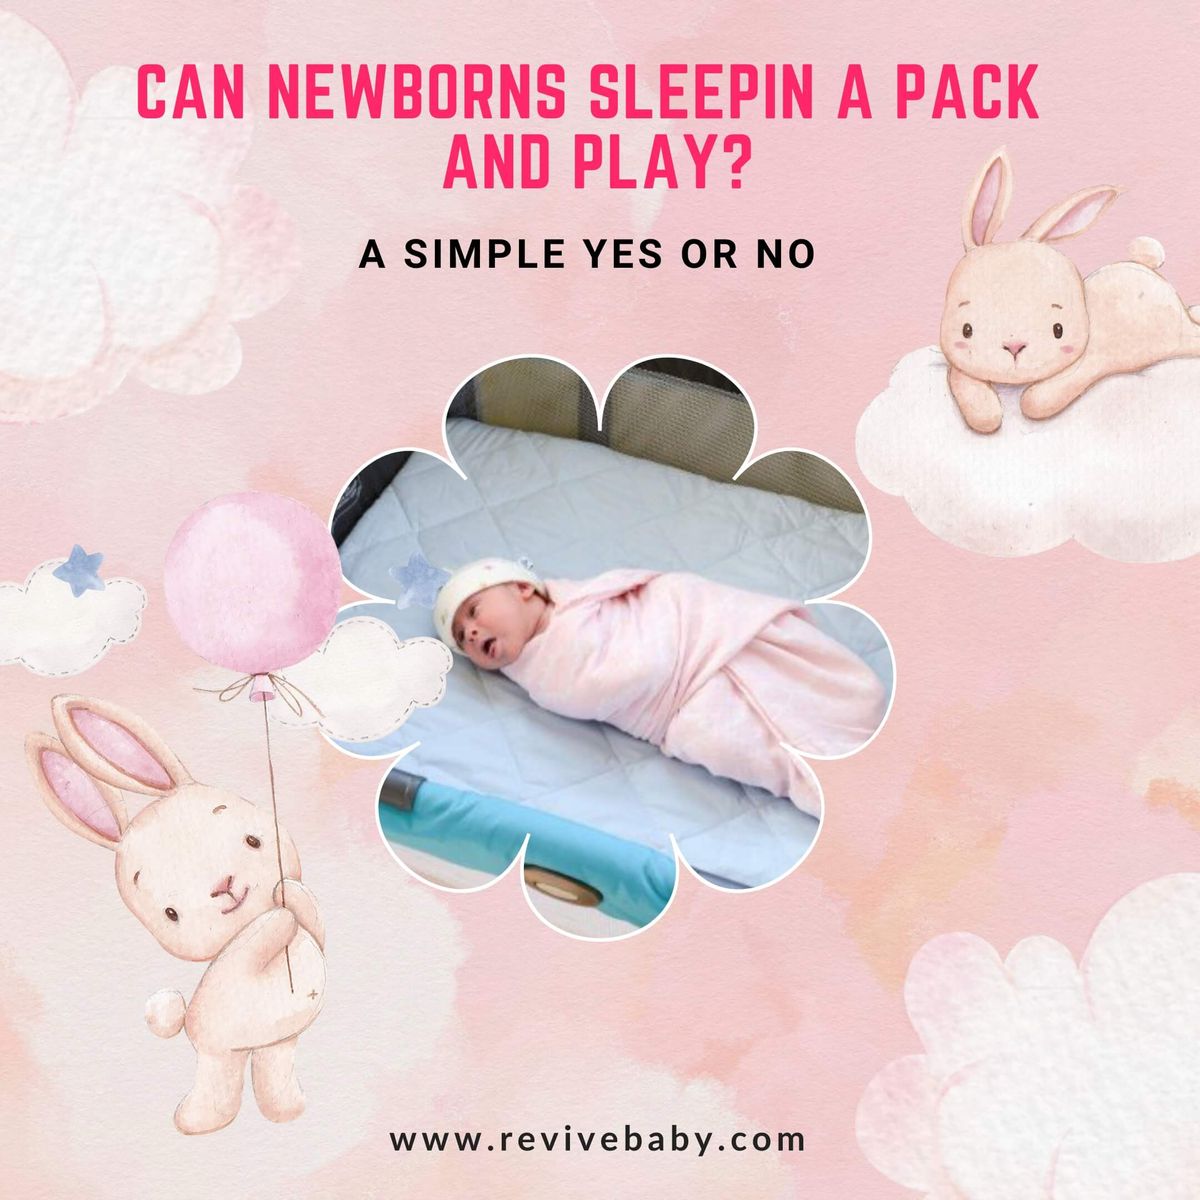 Can Newborns Sleep In A Pack And Play - A Simple Yes Or No